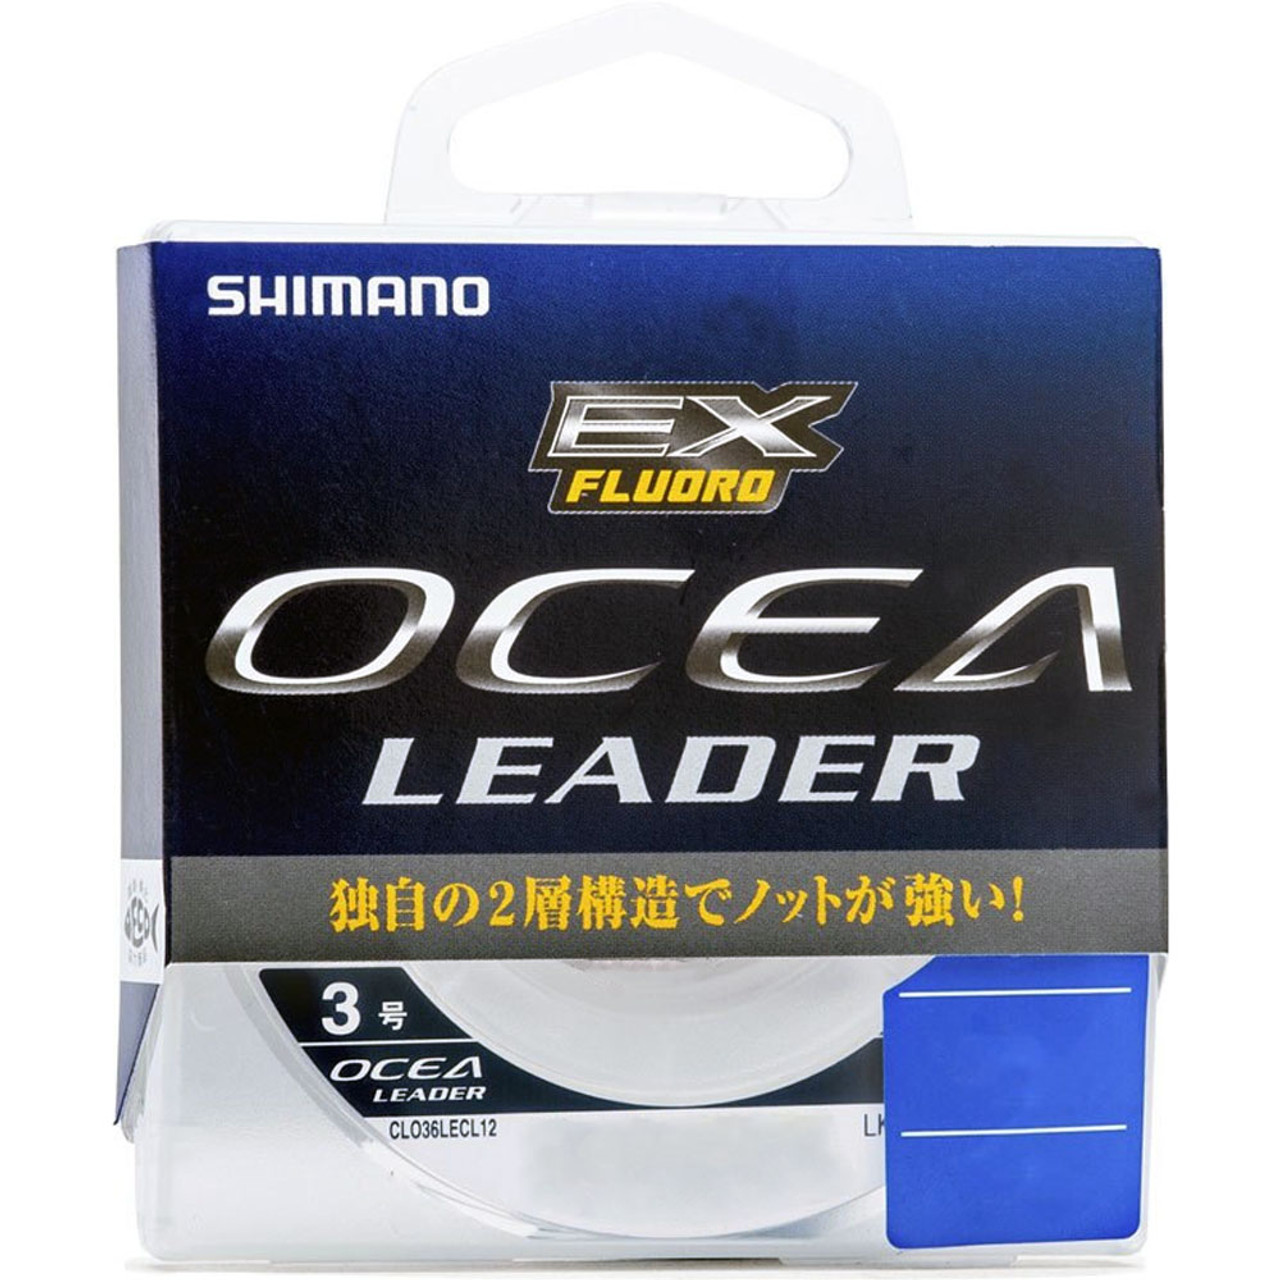 https://cdn11.bigcommerce.com/s-55834/images/stencil/1280x1280/products/3323/15544/shimano-ocea-leader__00155.1655702463.jpg?c=2